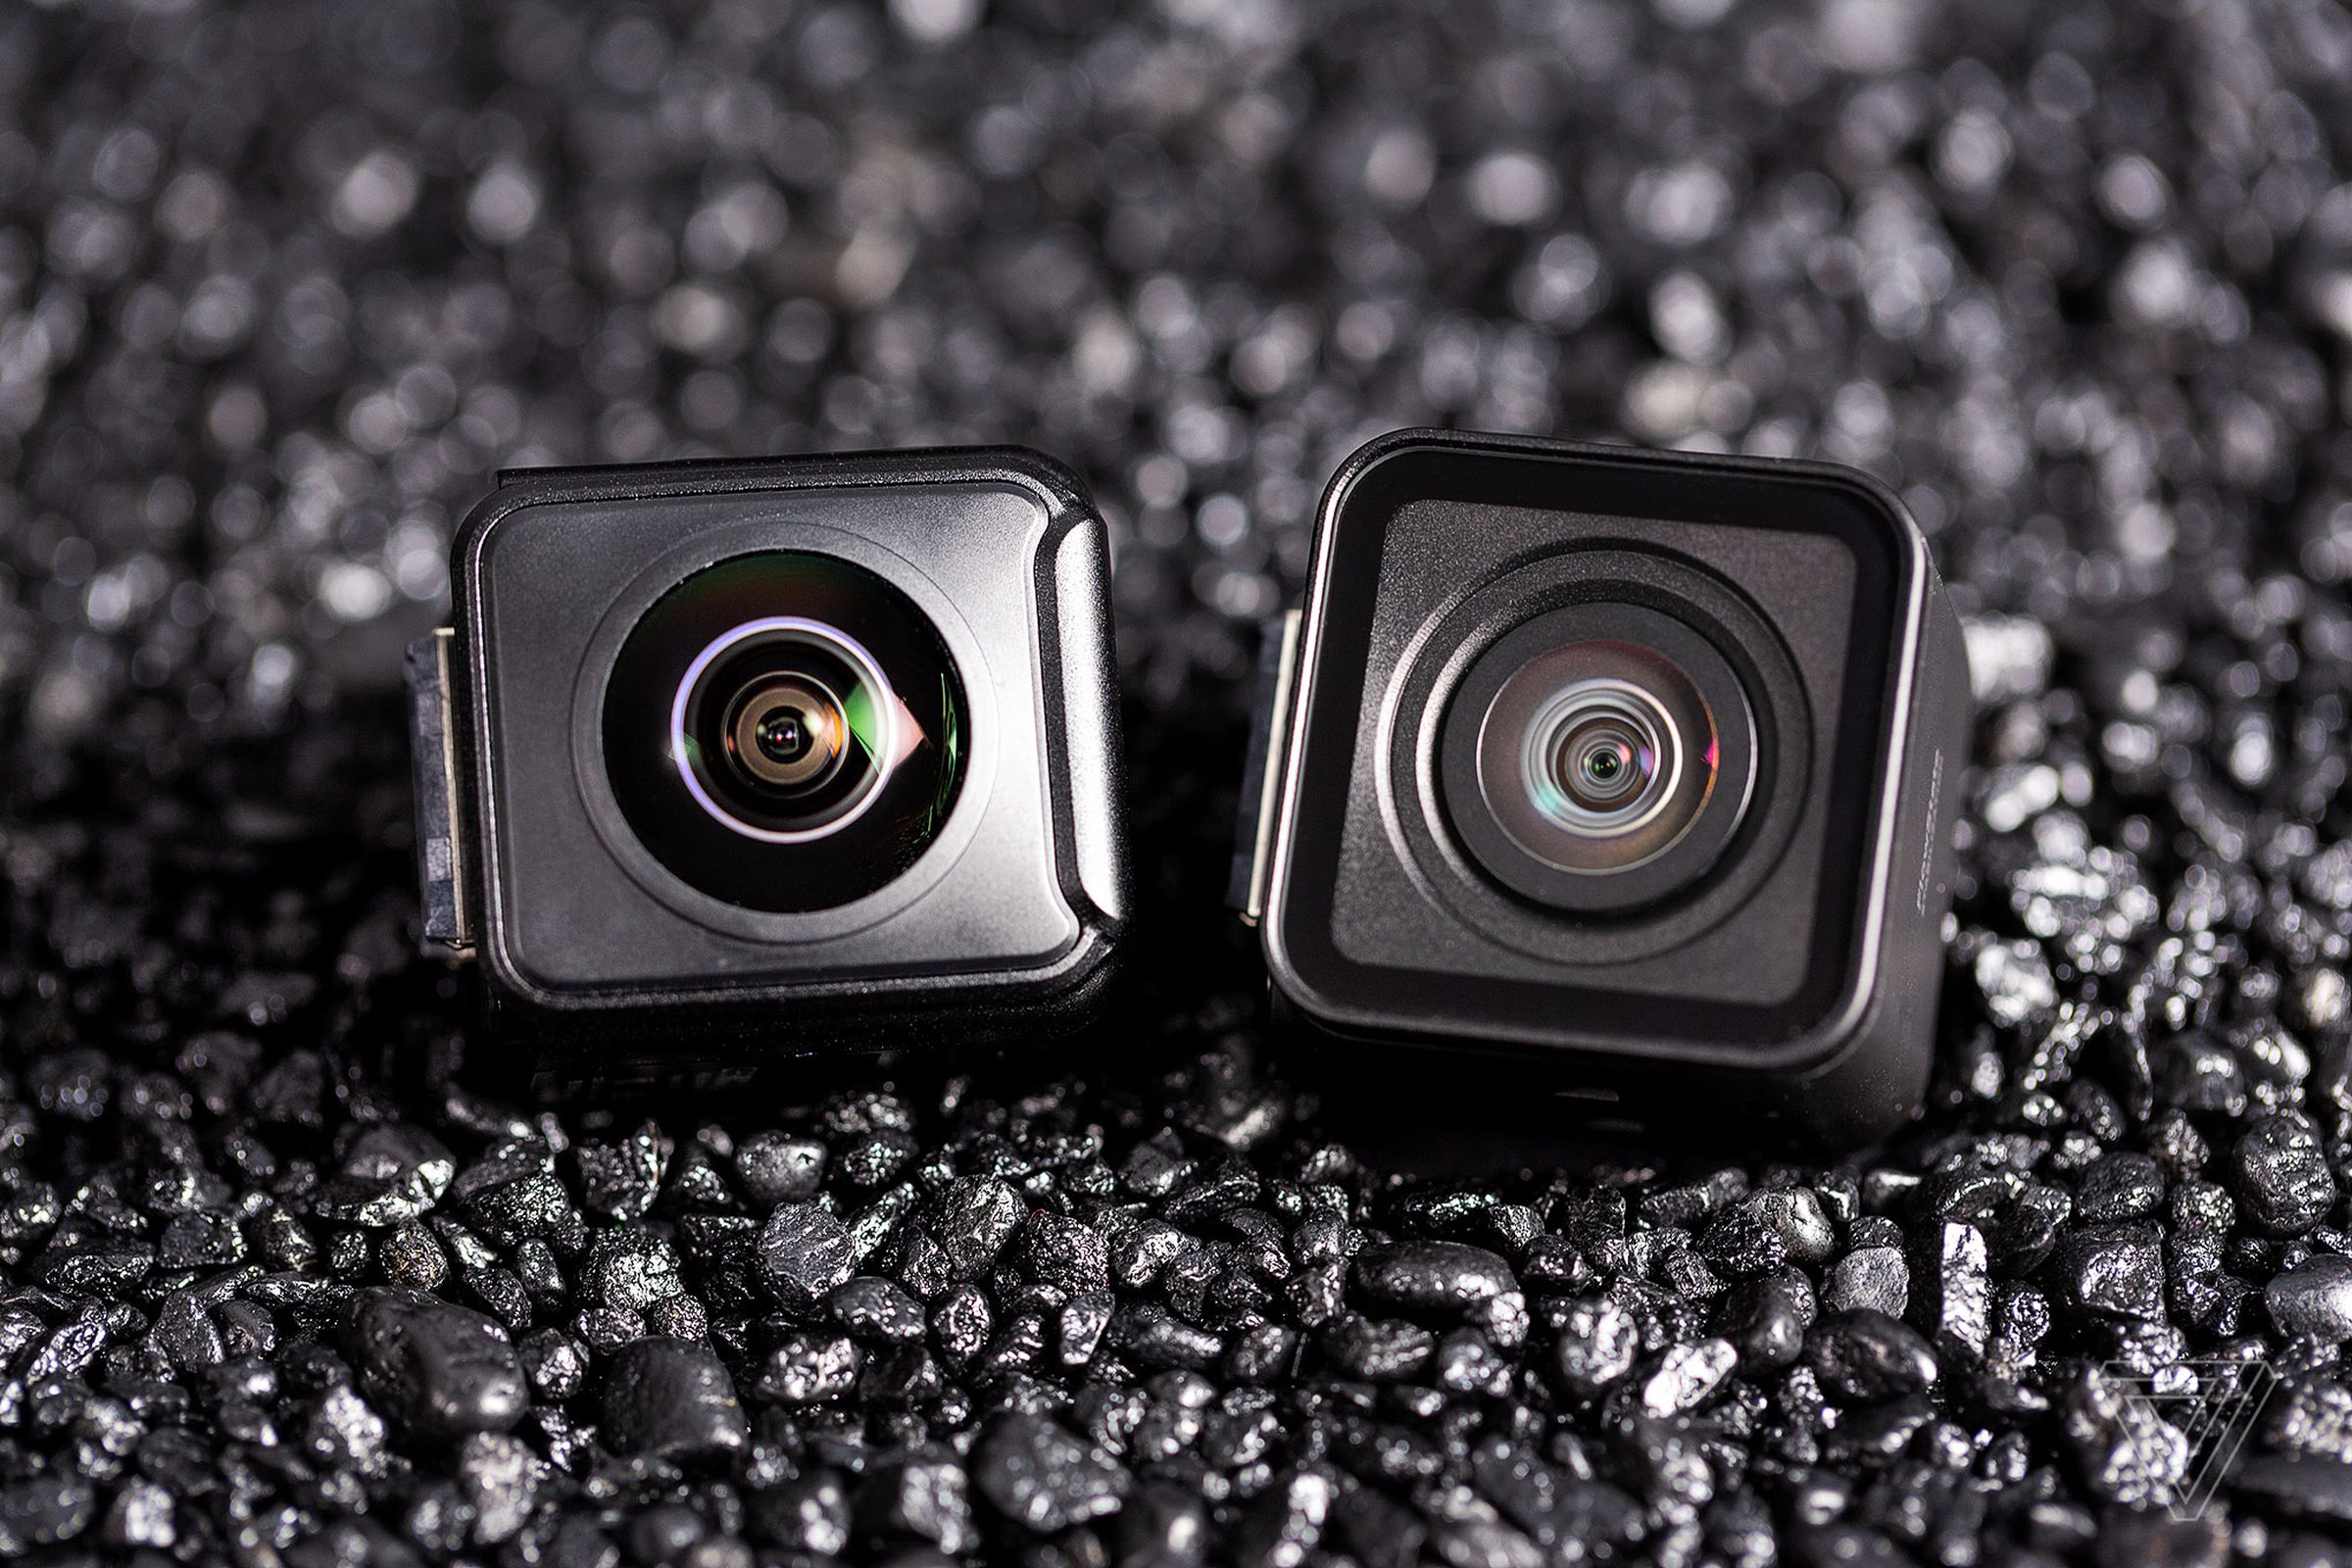 The 360 camera mod (left) and the 4K action camera mod (right).